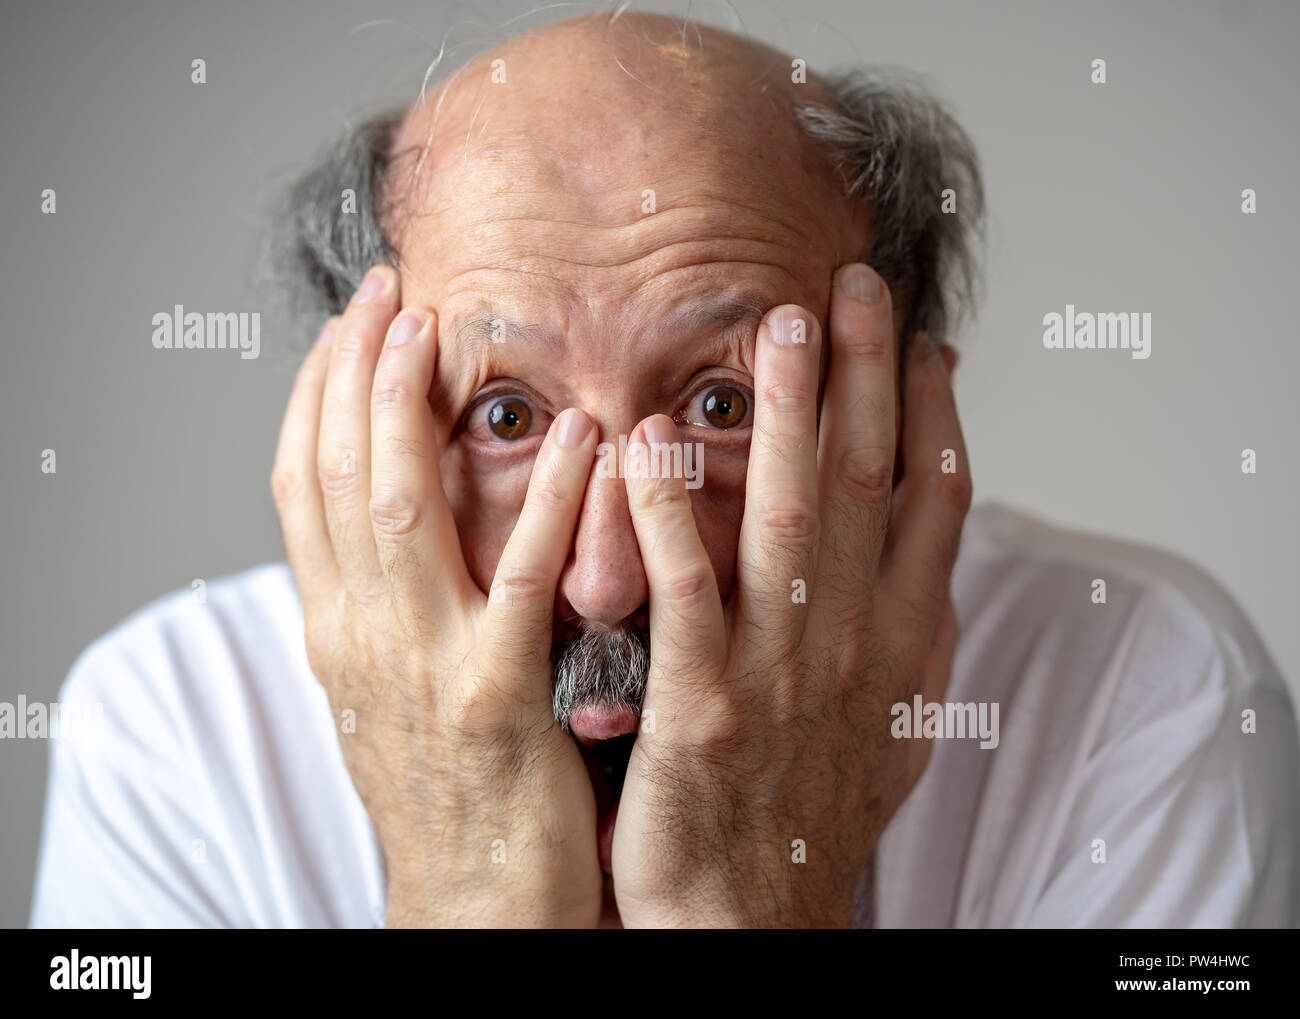 Image Panicked Face Screaming Fear Picture Dread Halloween Day Dead Stock  Photo by ©robertohunger 234887336